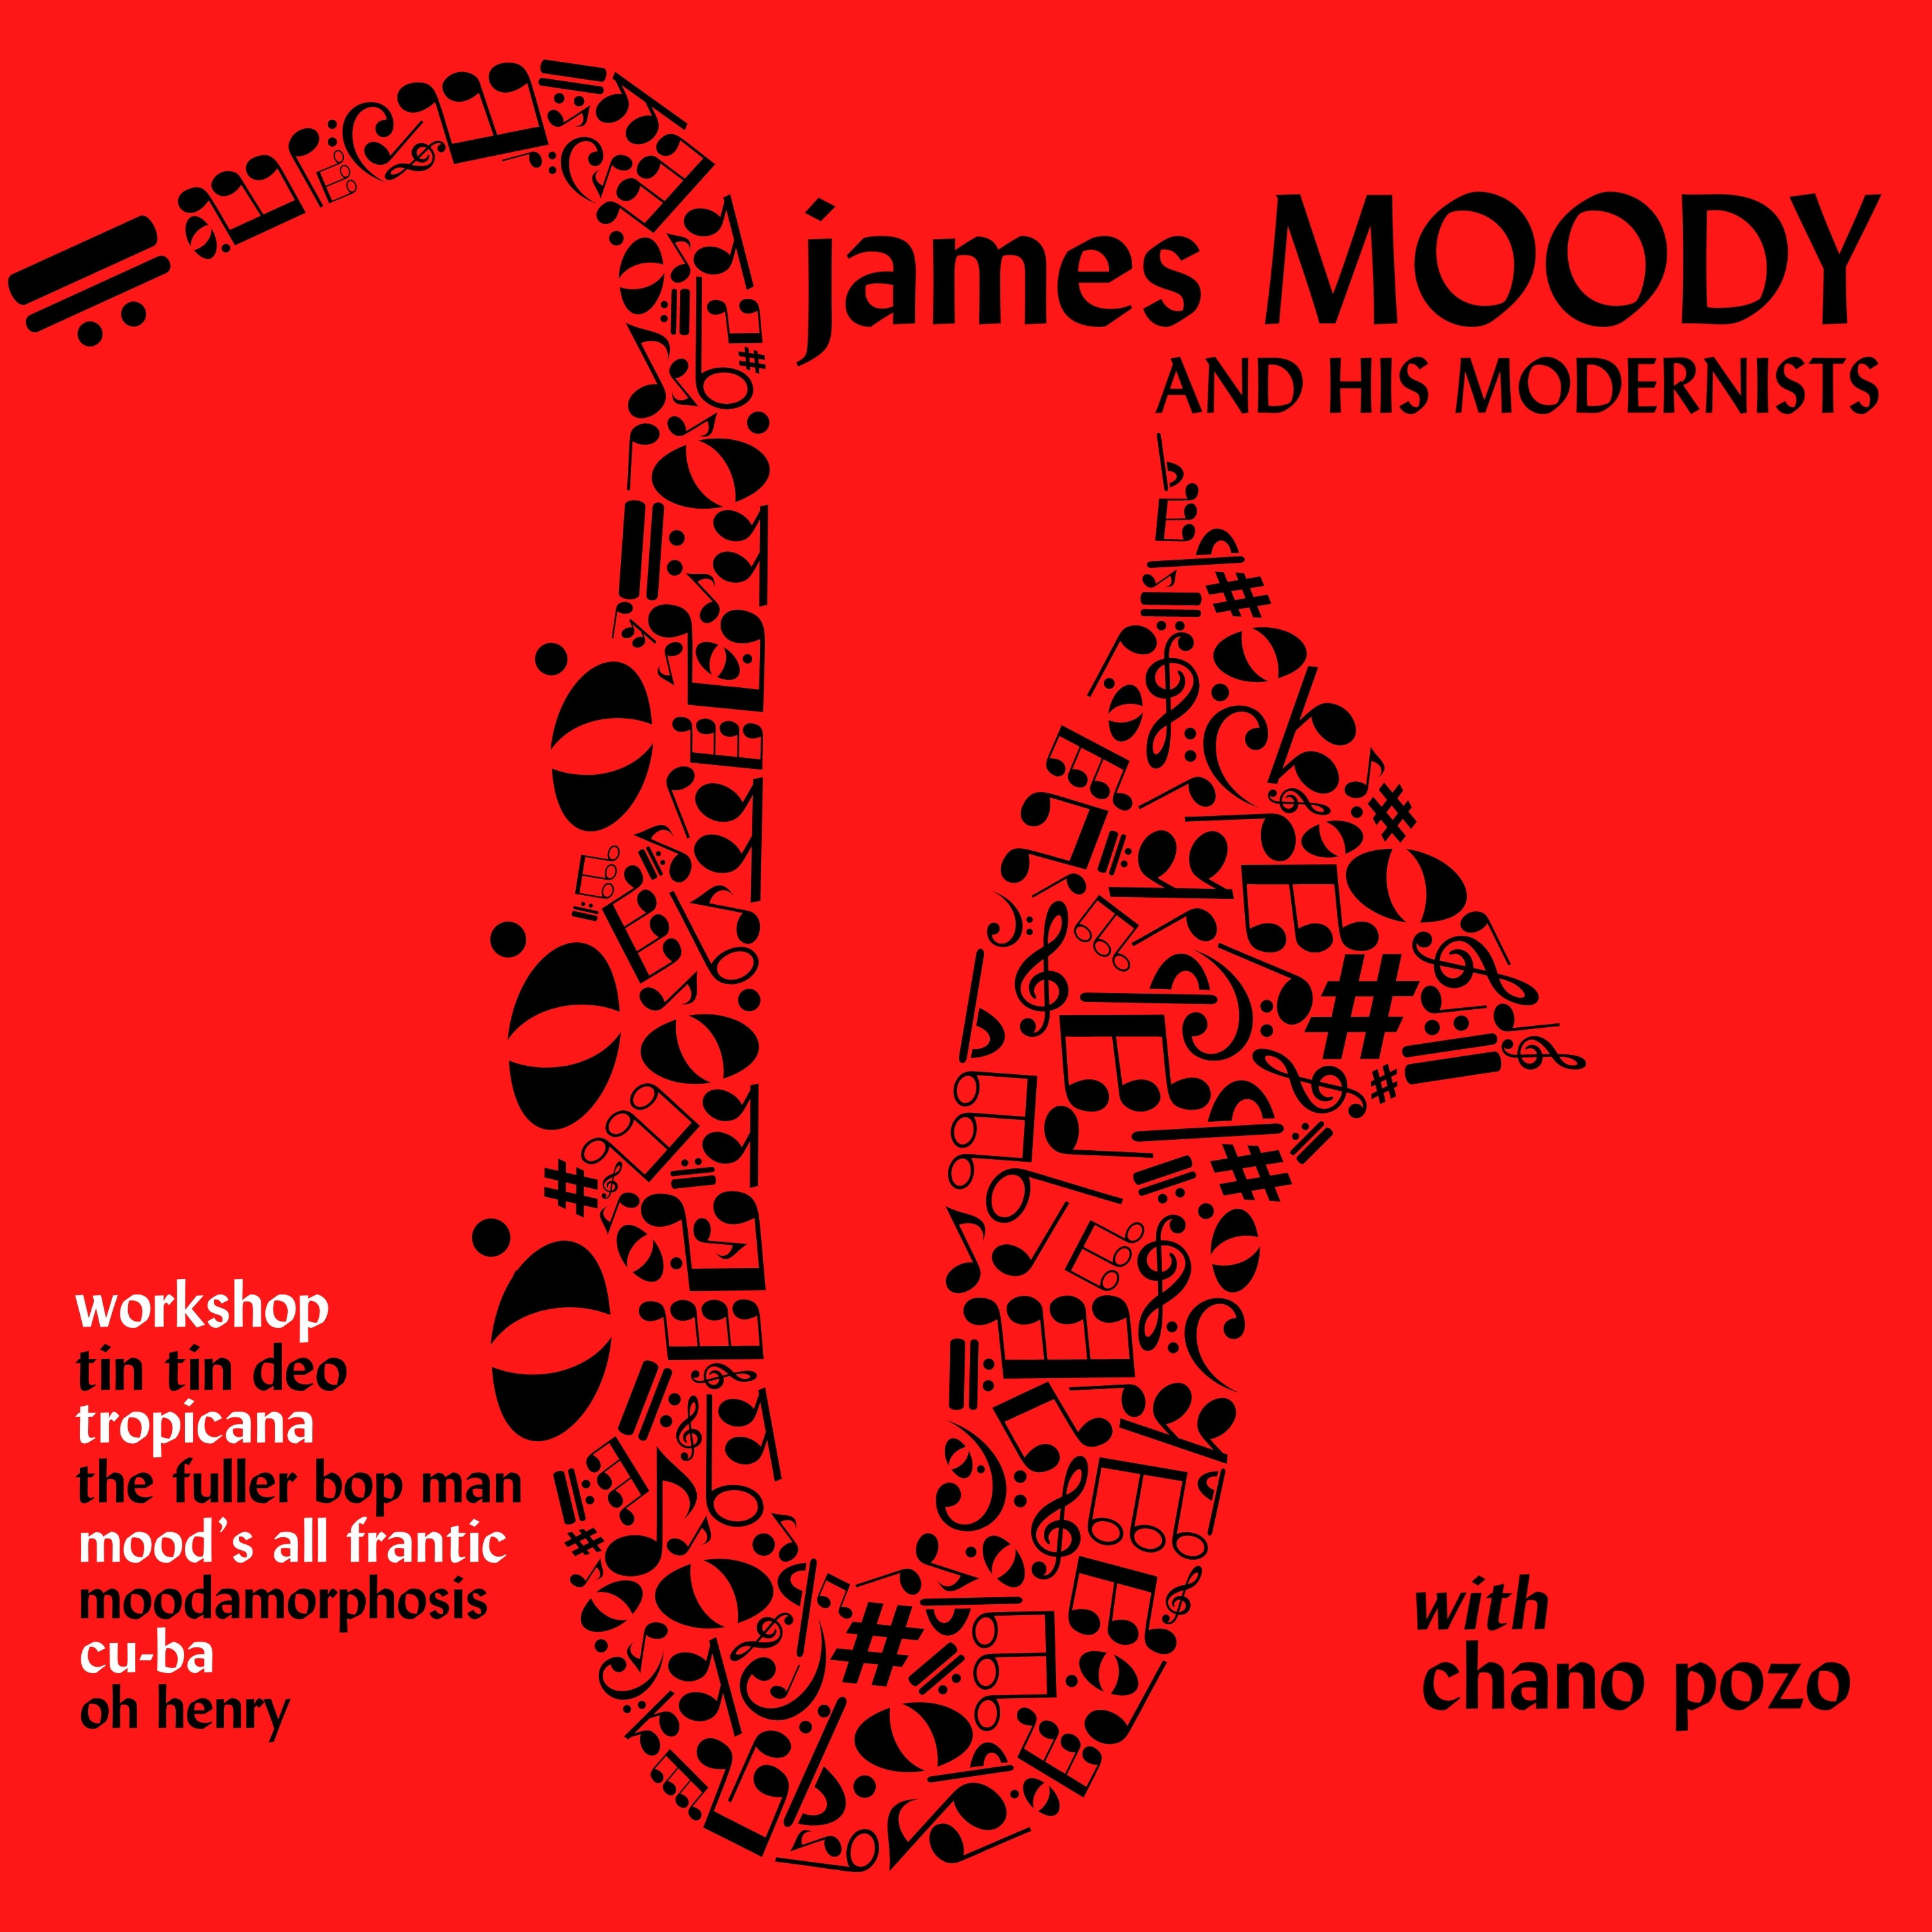 James Moody and his Modernists - James Moody and His Modernists (1952/2021) [FLAC 24bit/48kHz]